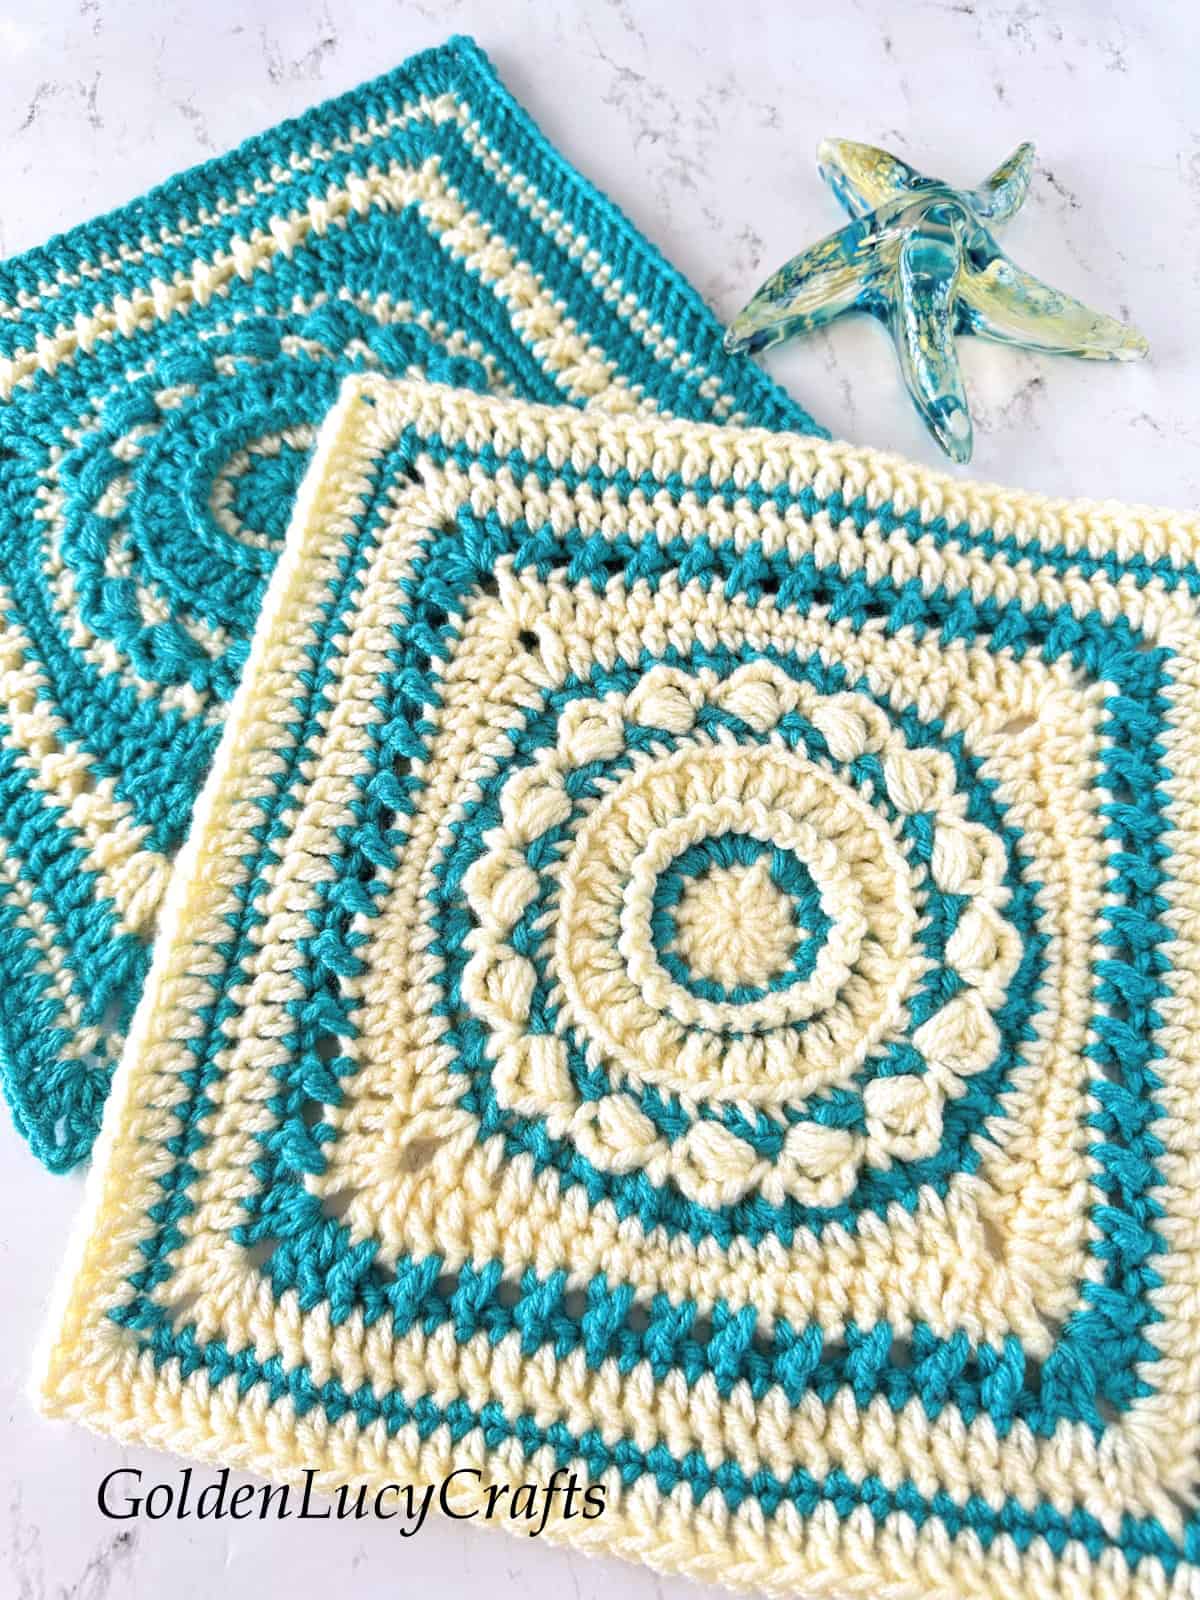 Two crocheted square motifs made in cream and aqua colors, glass star fish in the background.